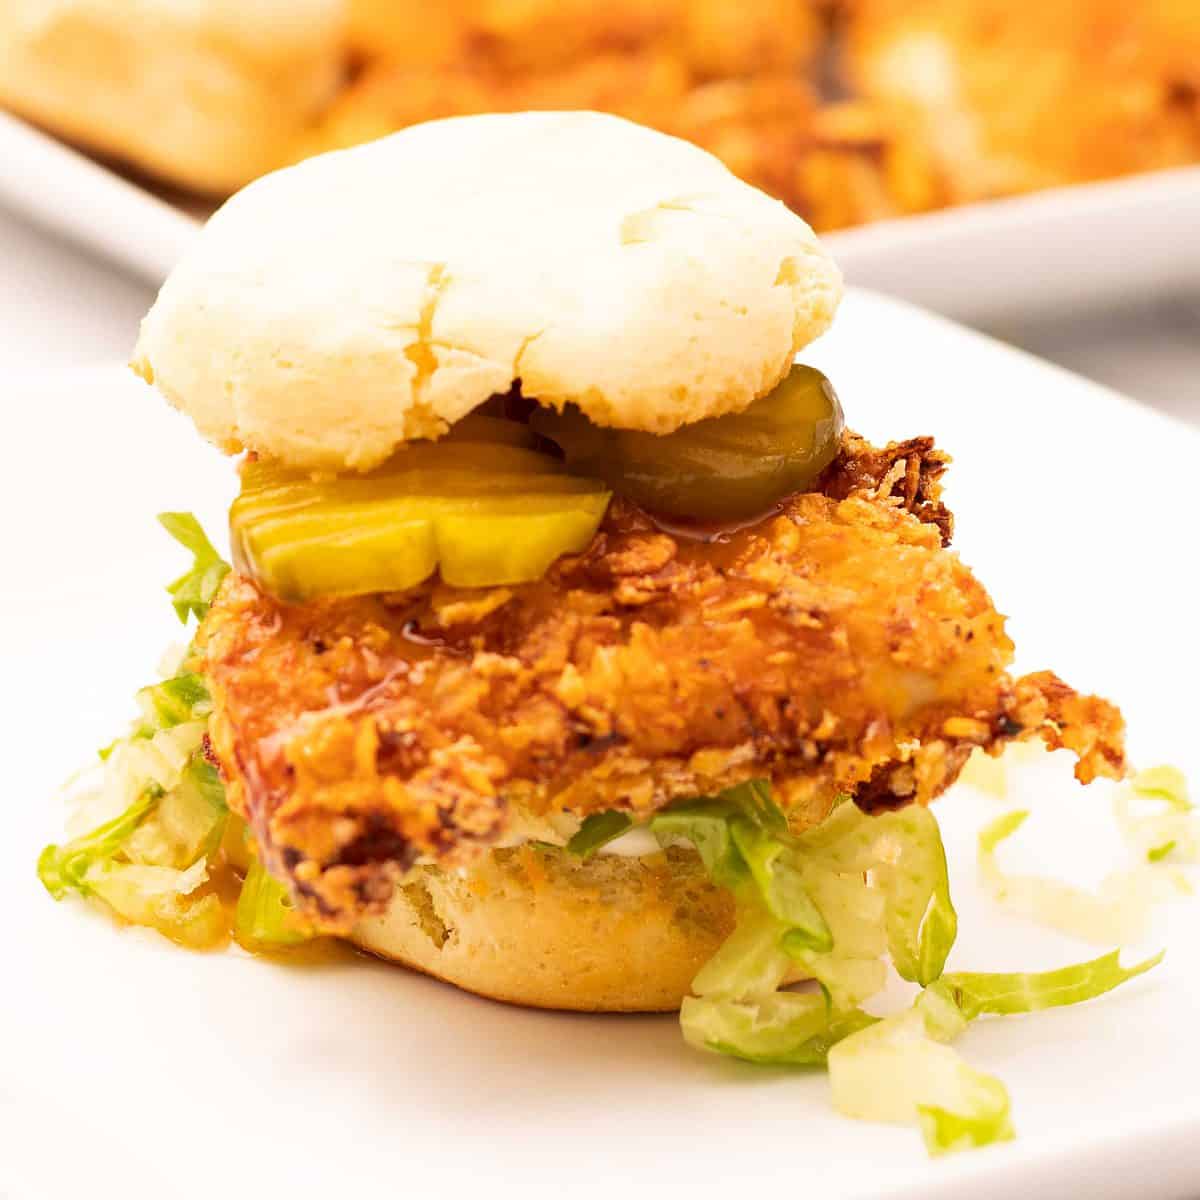 Fried chicken and biscuit sandwich with mayo, shredded lettuce, pickles, and hot honey sauce.